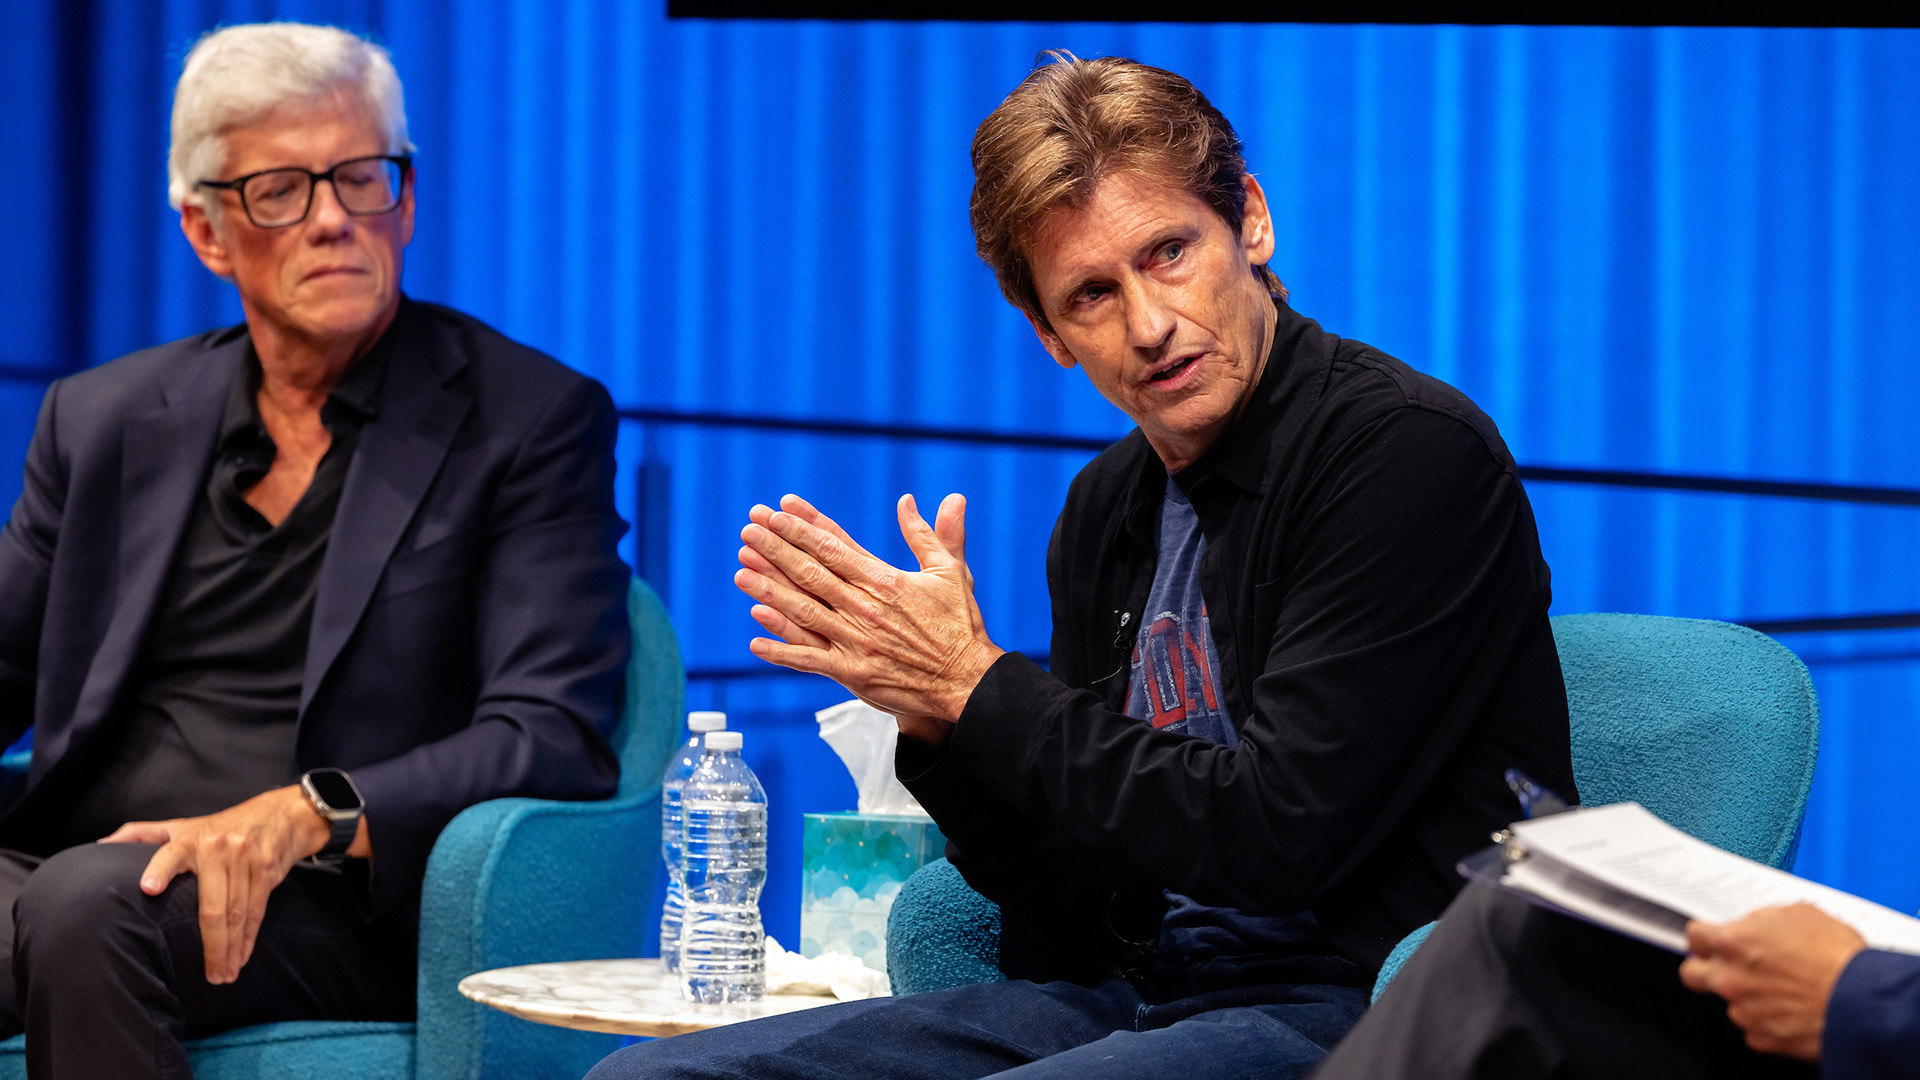 Peter Tolan (left) on sitting on stage with Dennis Leary (right).